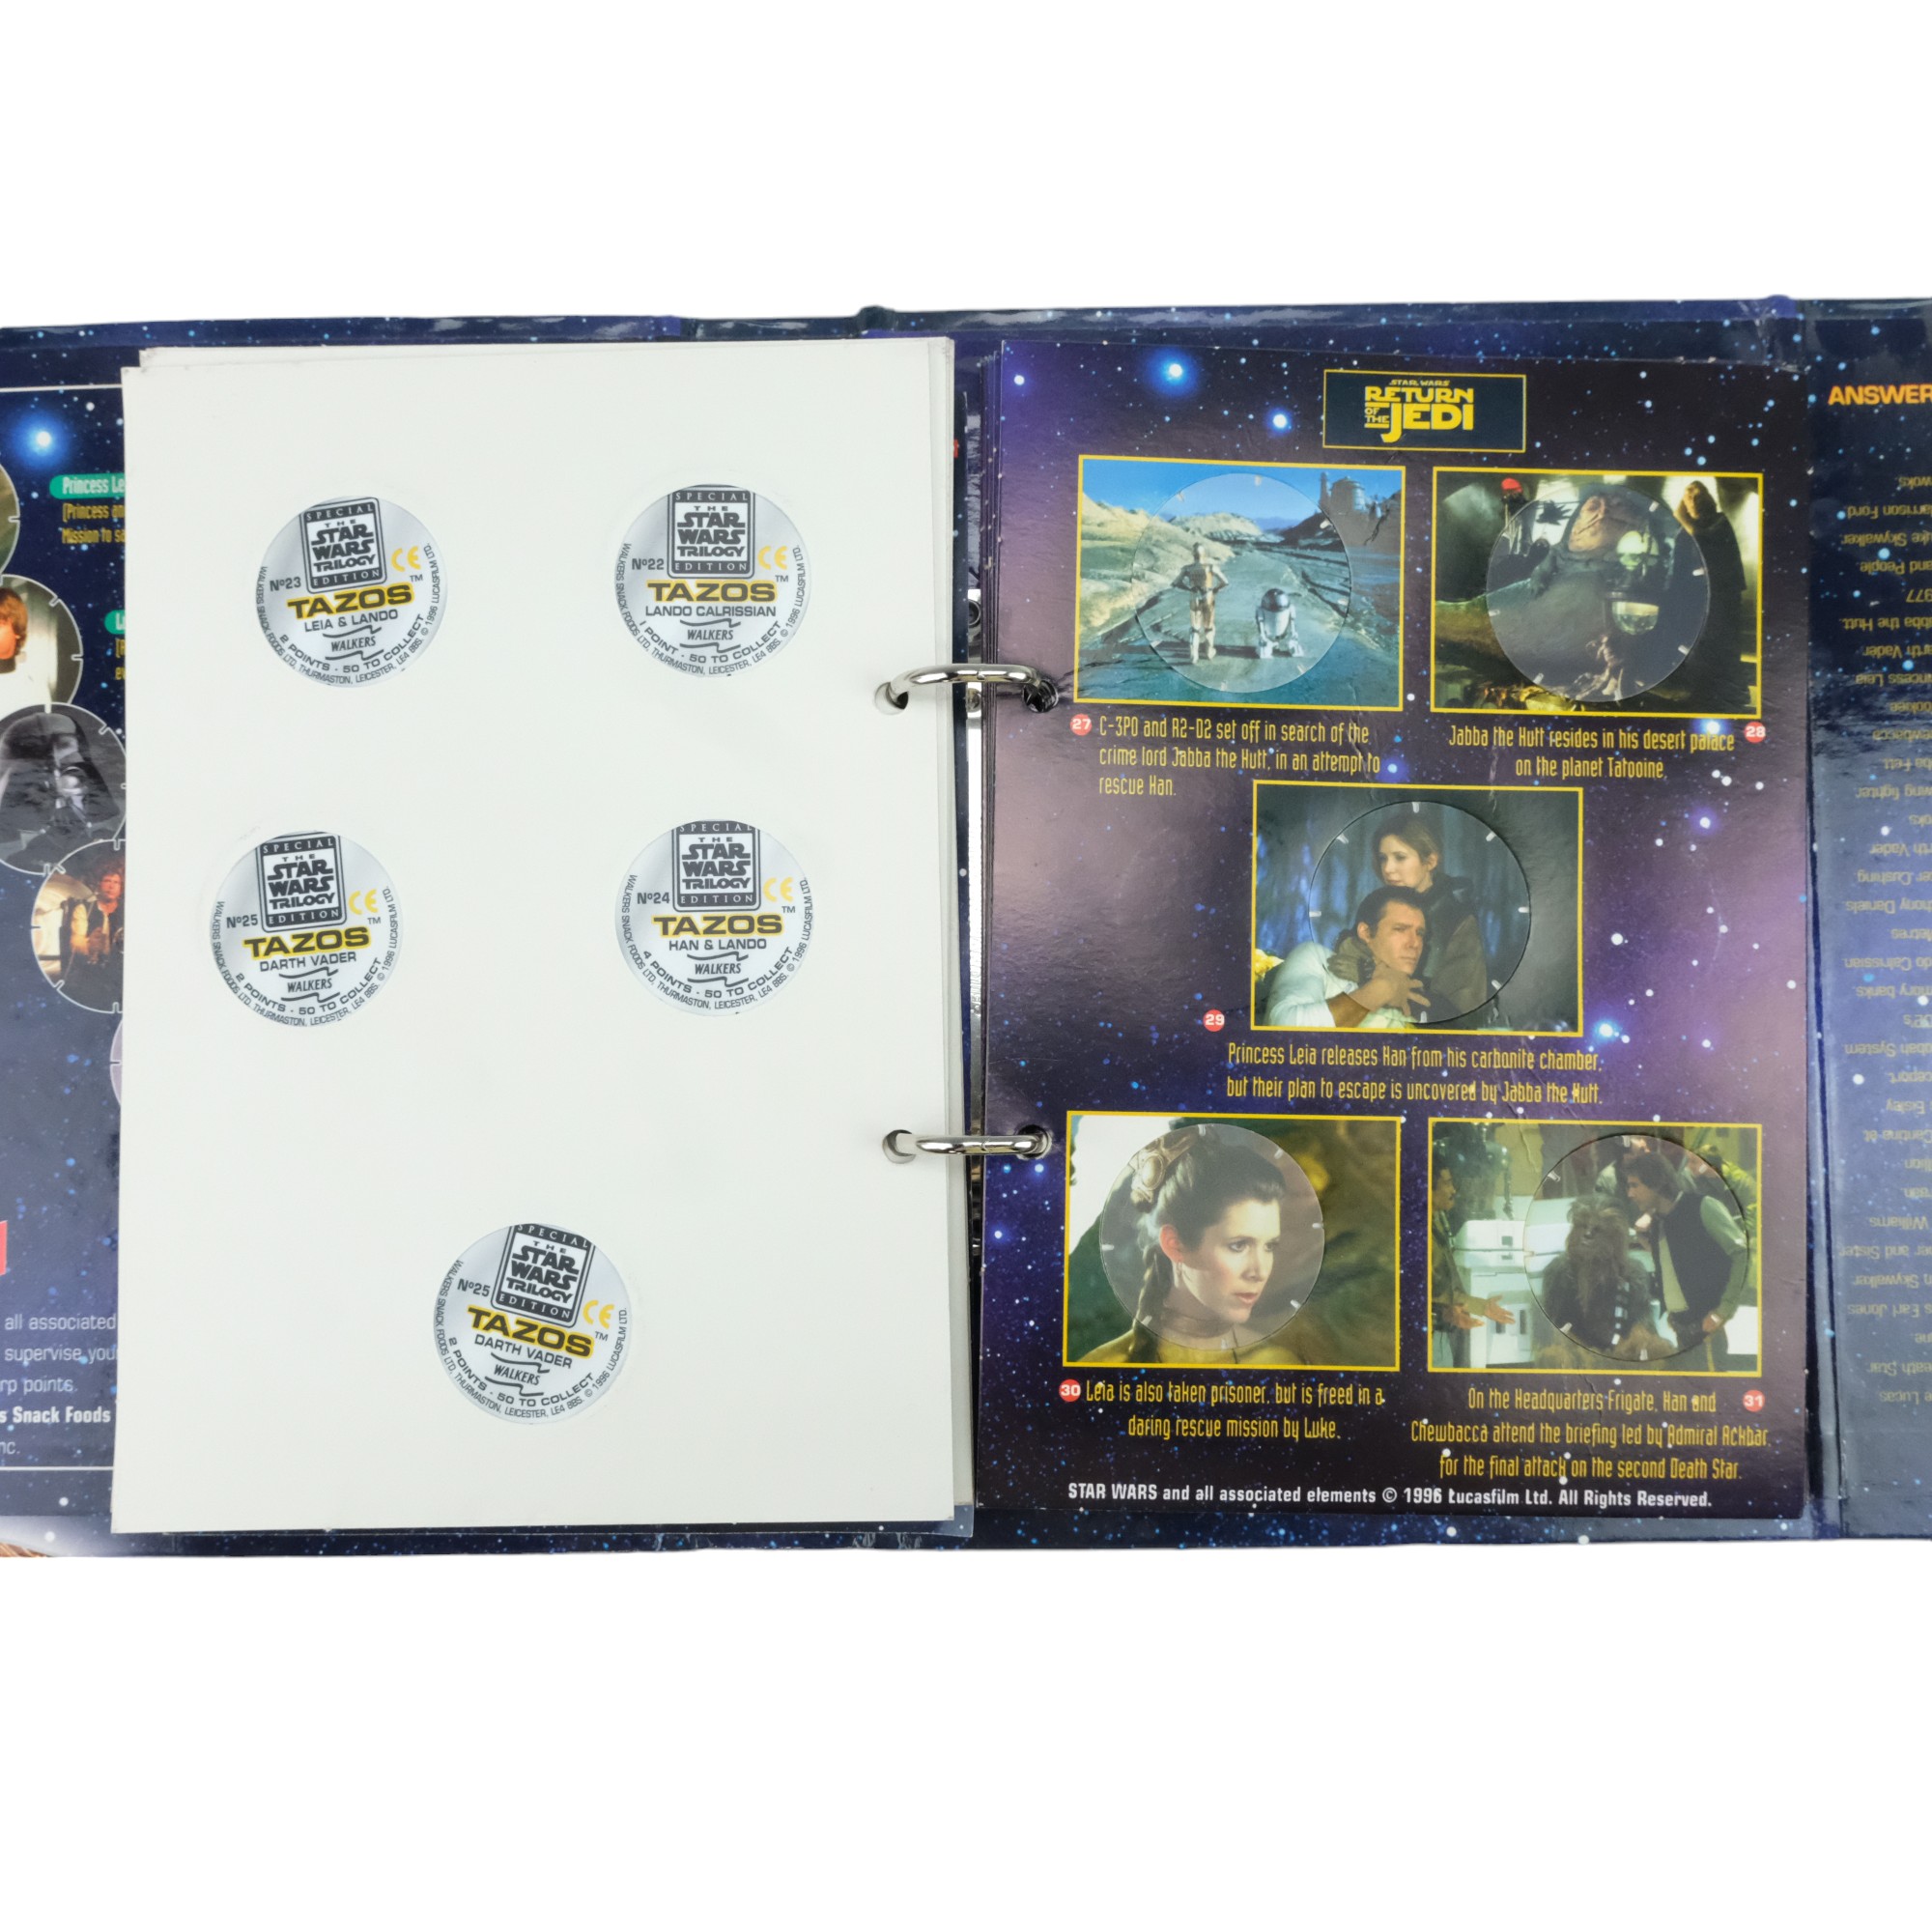 The Star Wars Trilogy edition Tazo collectors force pack - Image 3 of 5